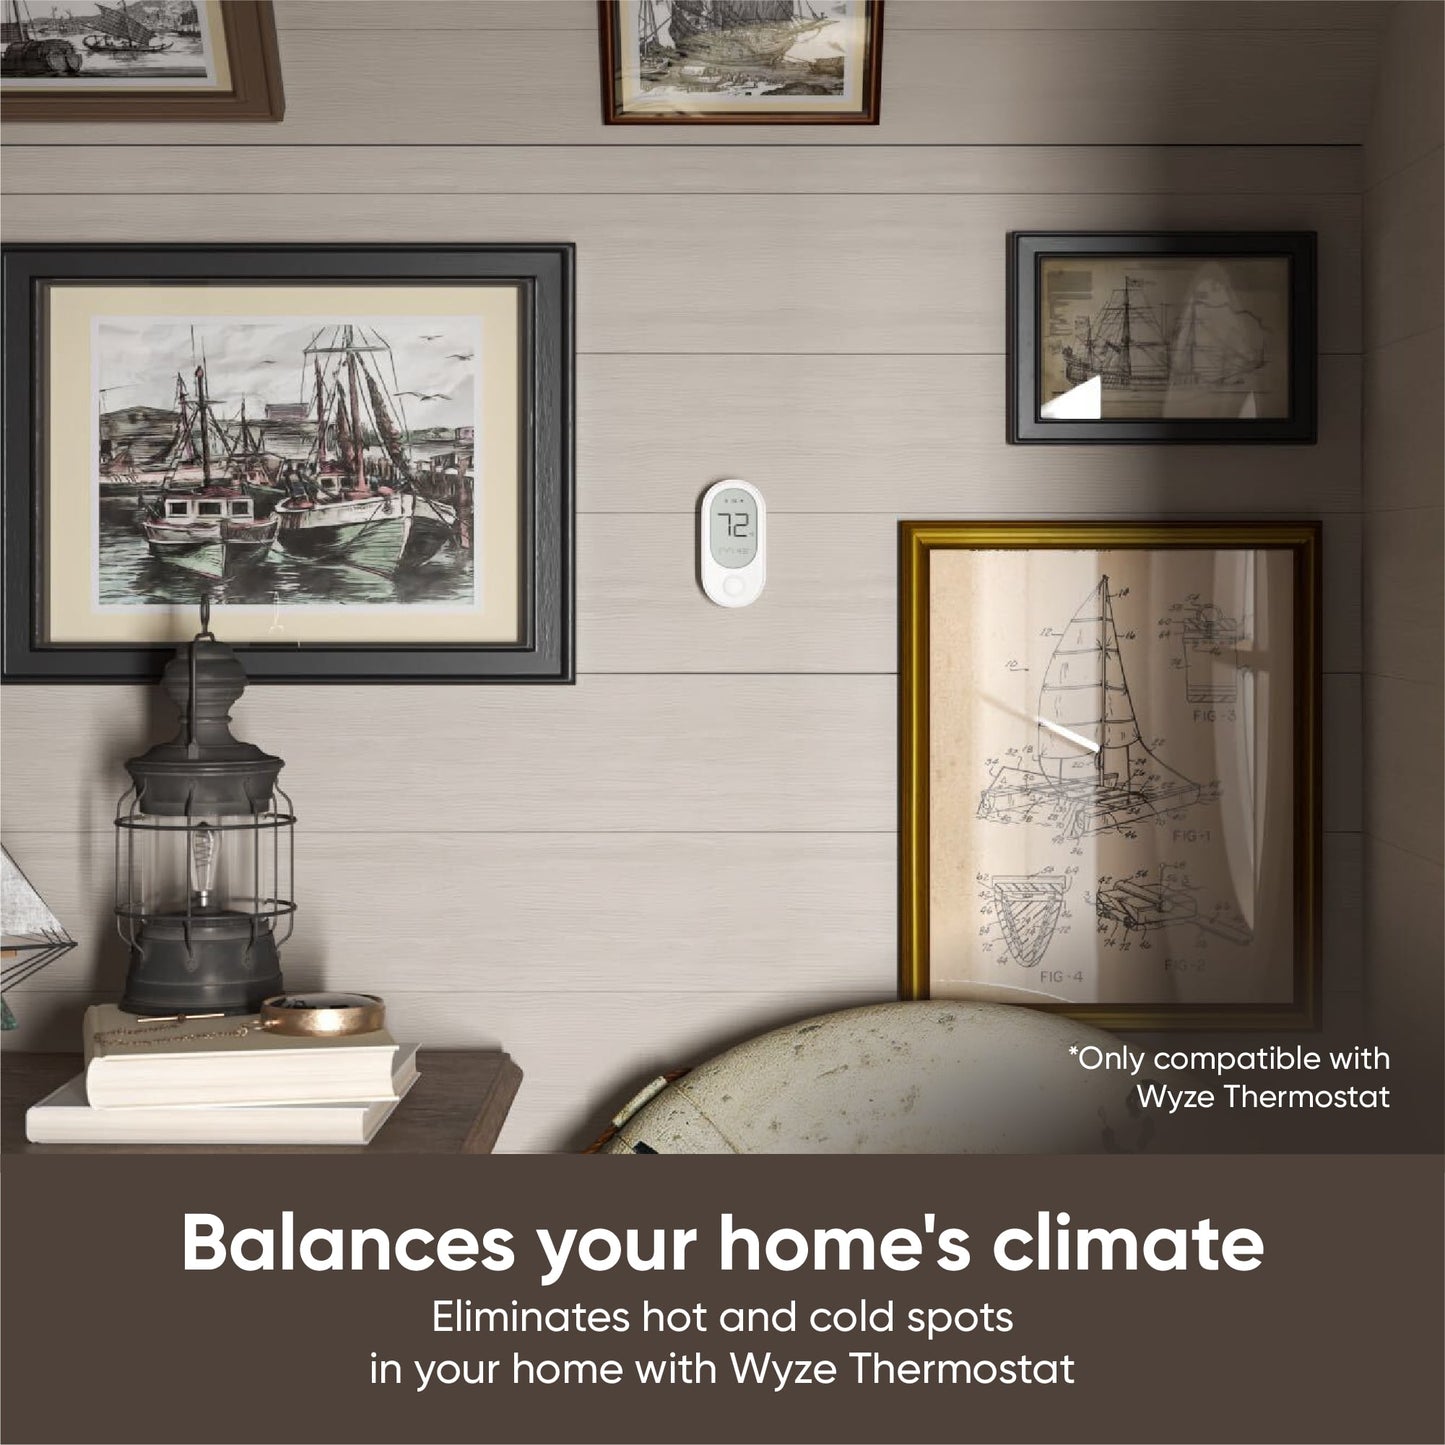 Room sensor mounted to a wall. White text overlay that says "Balances your home's climate." 